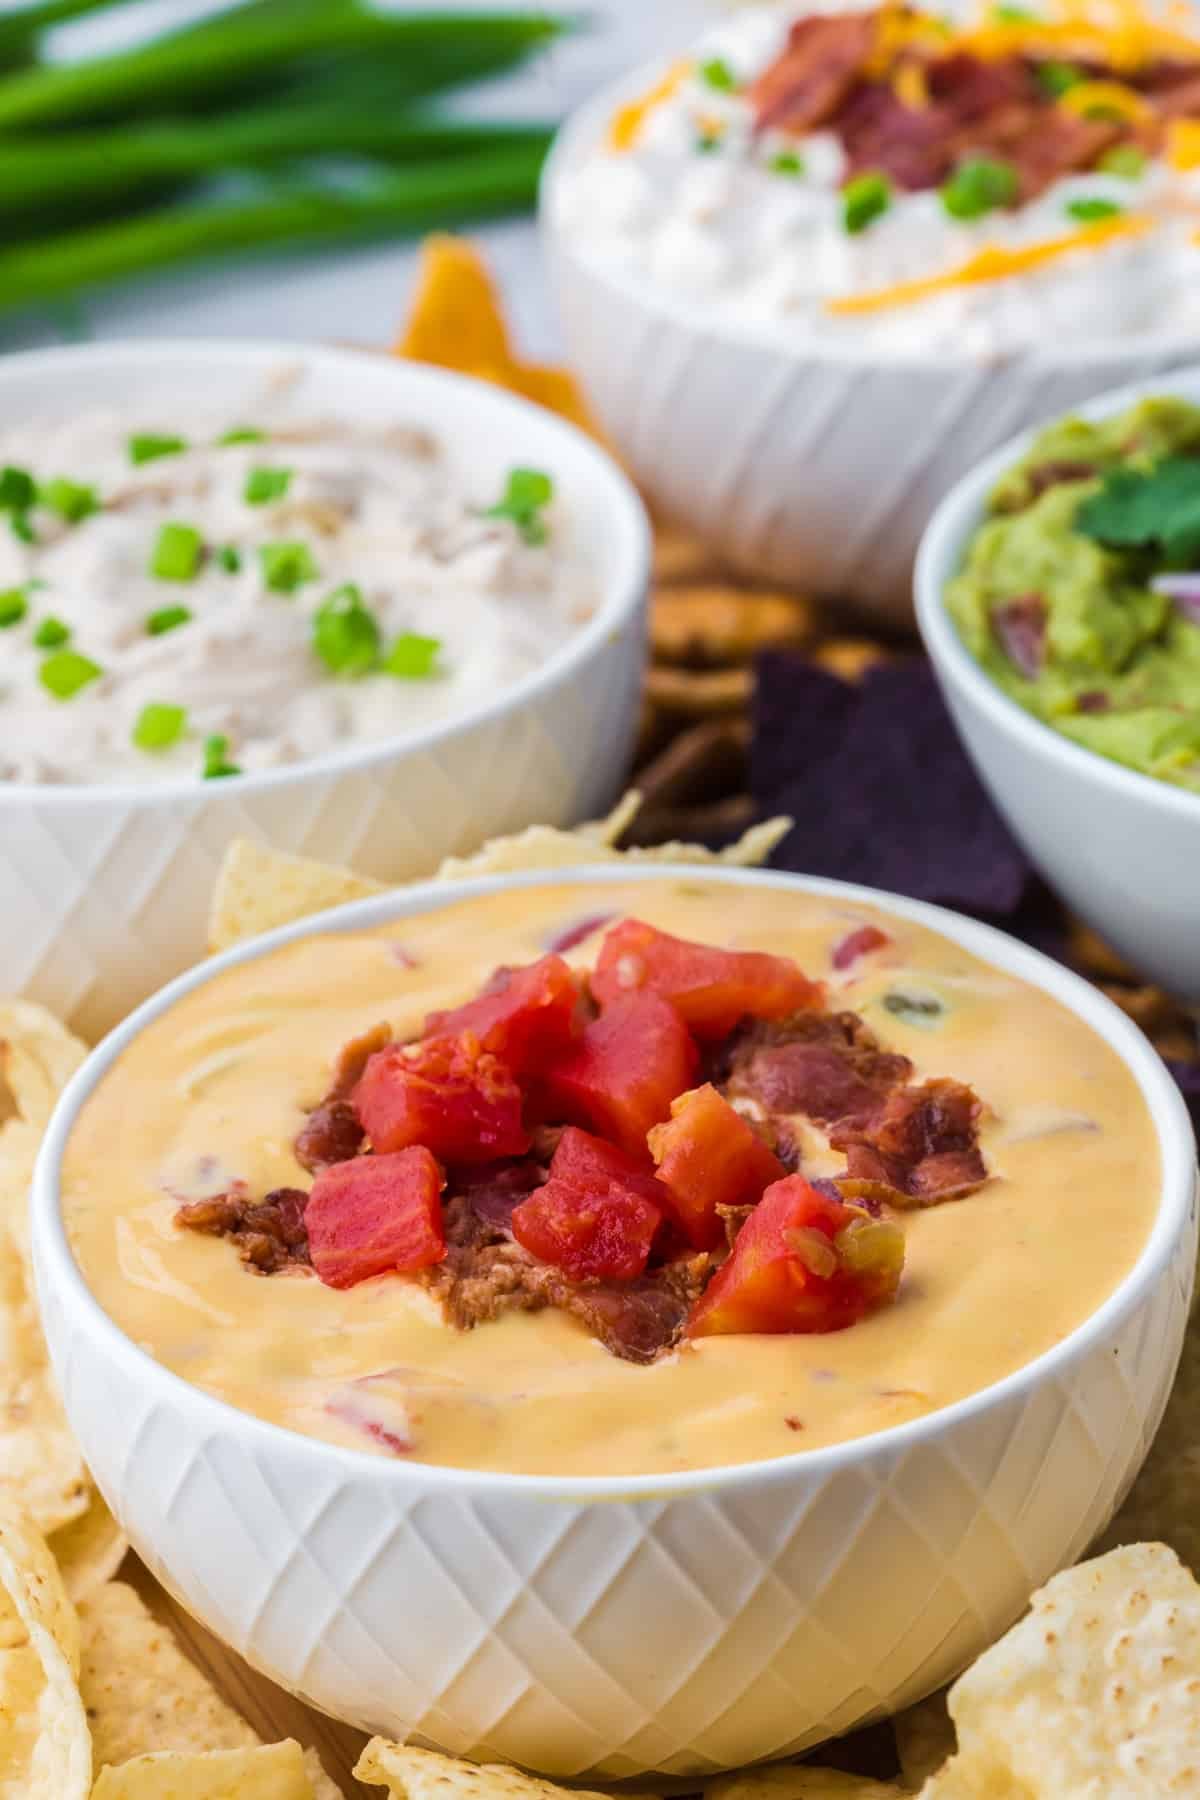 A bowl of nacho cheese dip garnished with bacon and tomatoes.